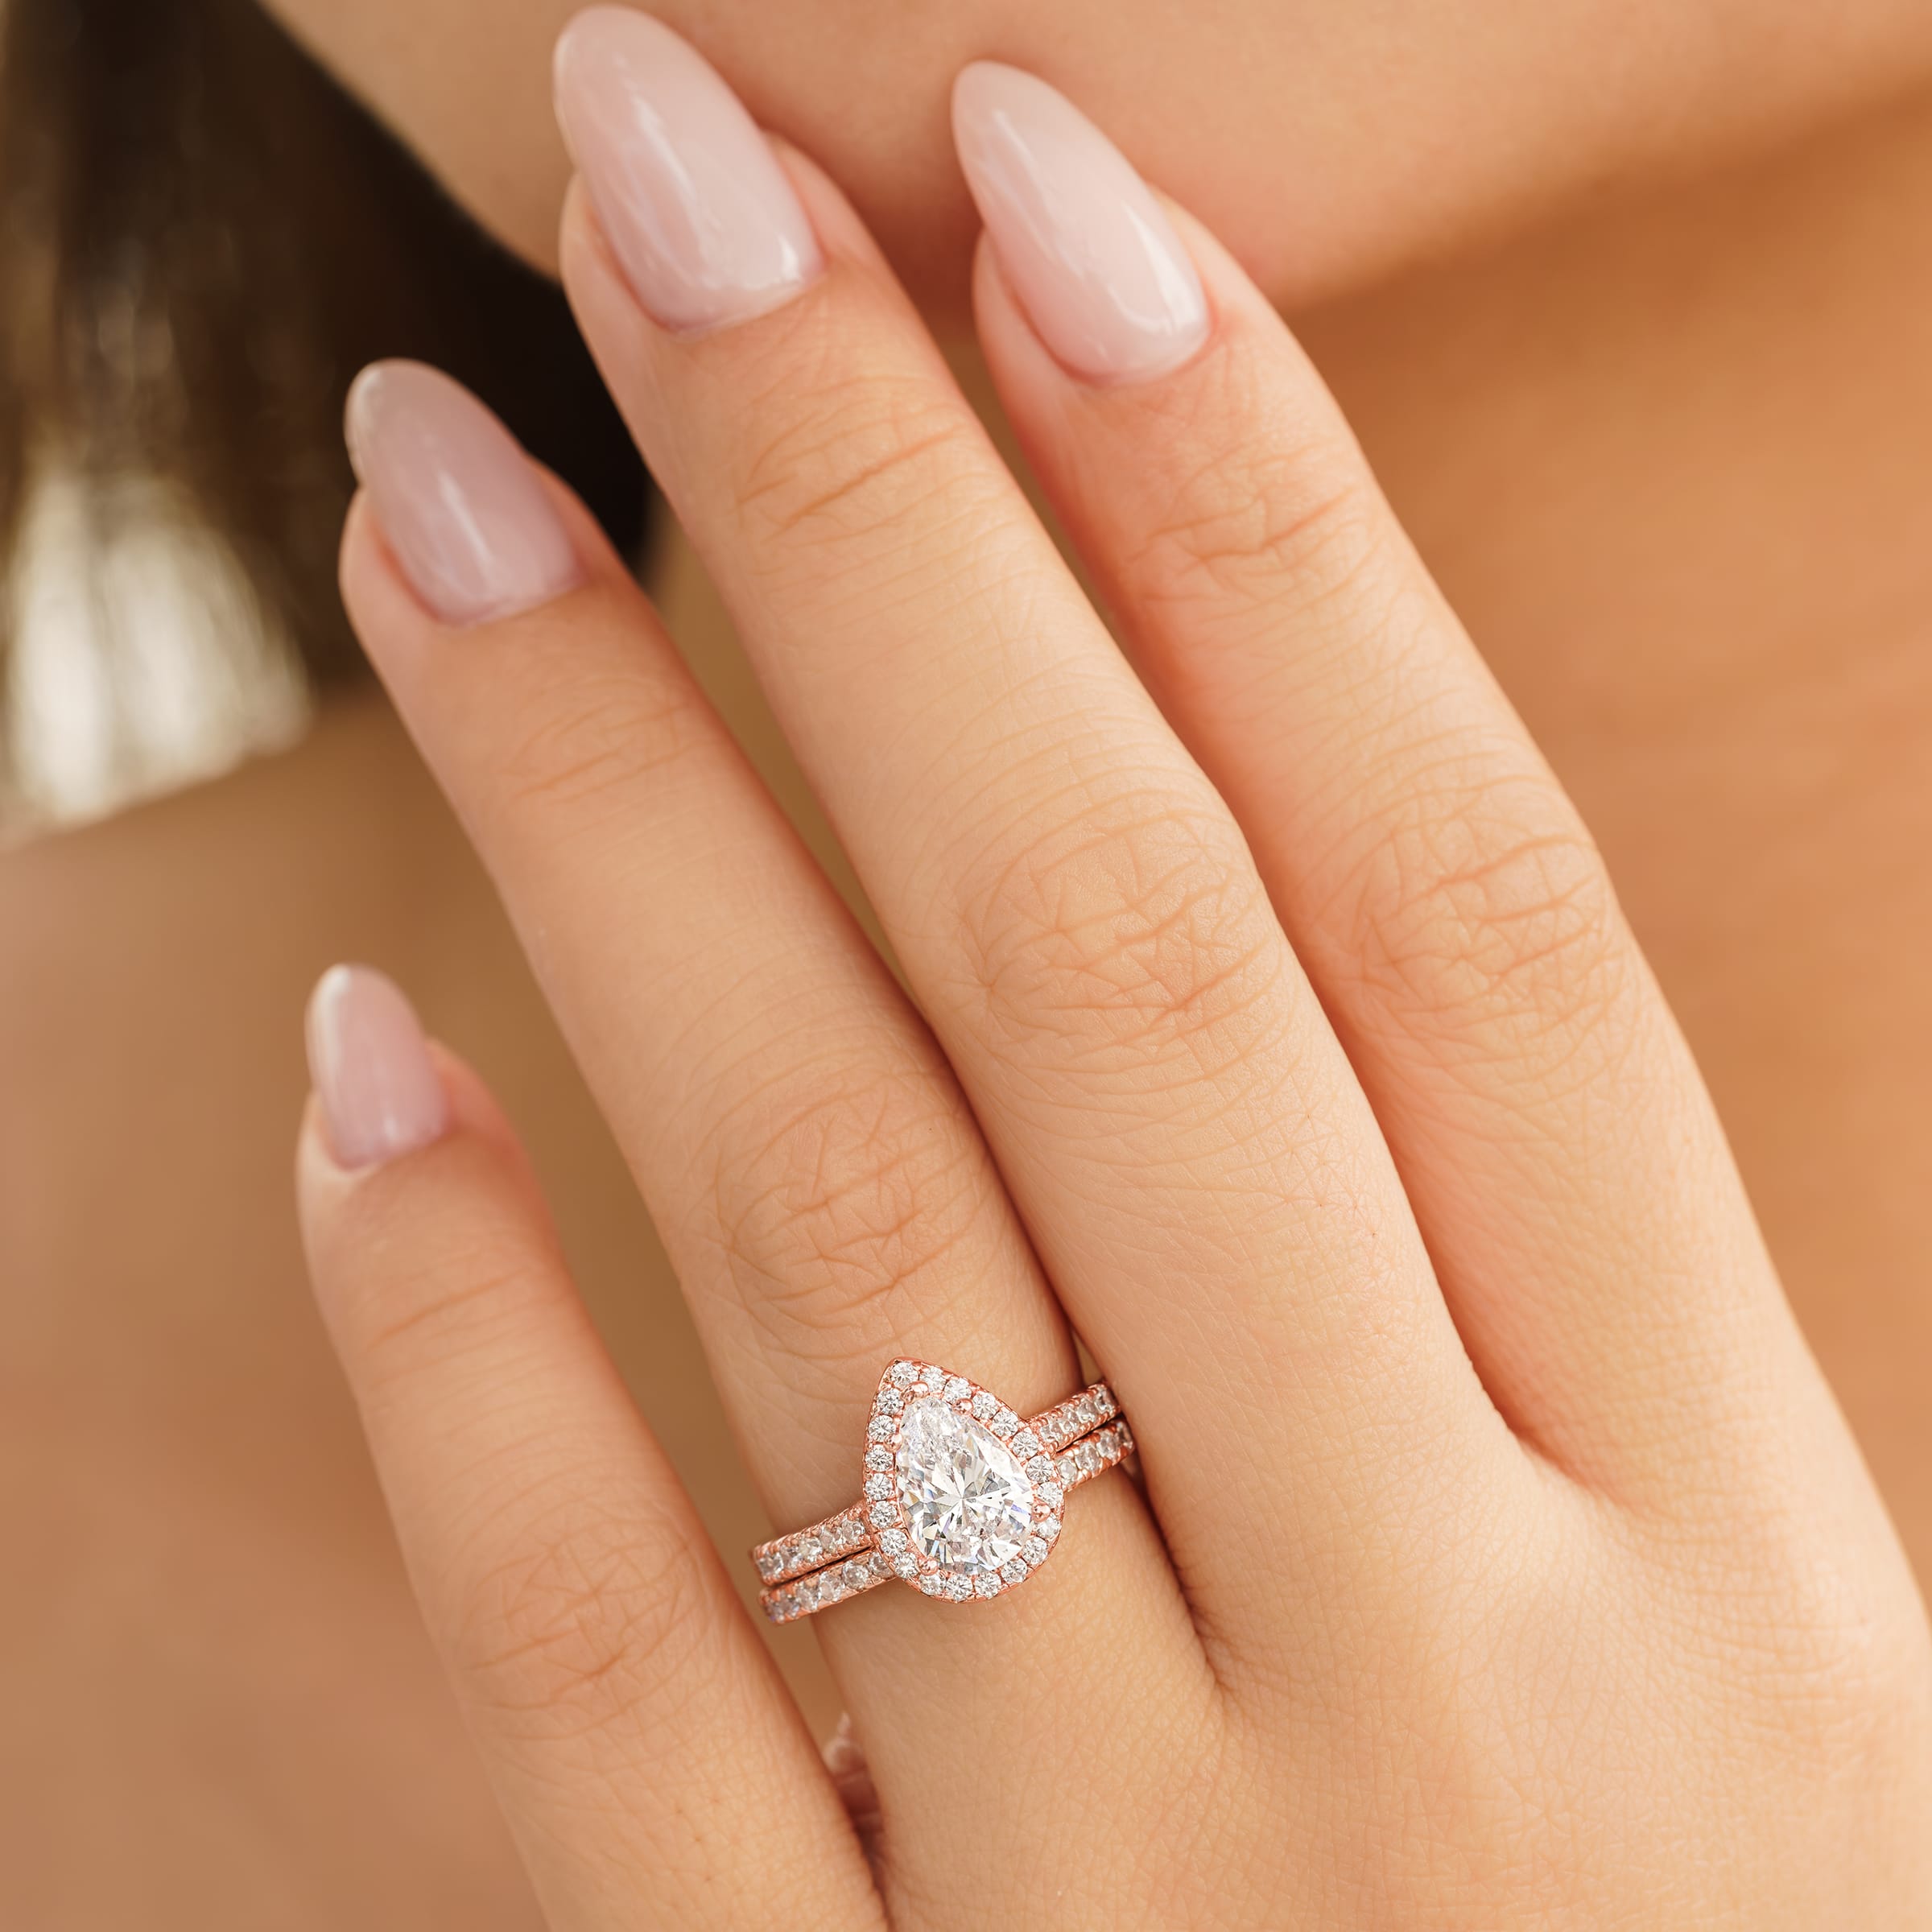 Jewelry For Women Rings Women Diamond Oval Super Sparkling Zirconia Ring  Ladies Jewelry Engaged Ring Cute Ring Pack Trendy Jewelry Gift for Her -  Walmart.com